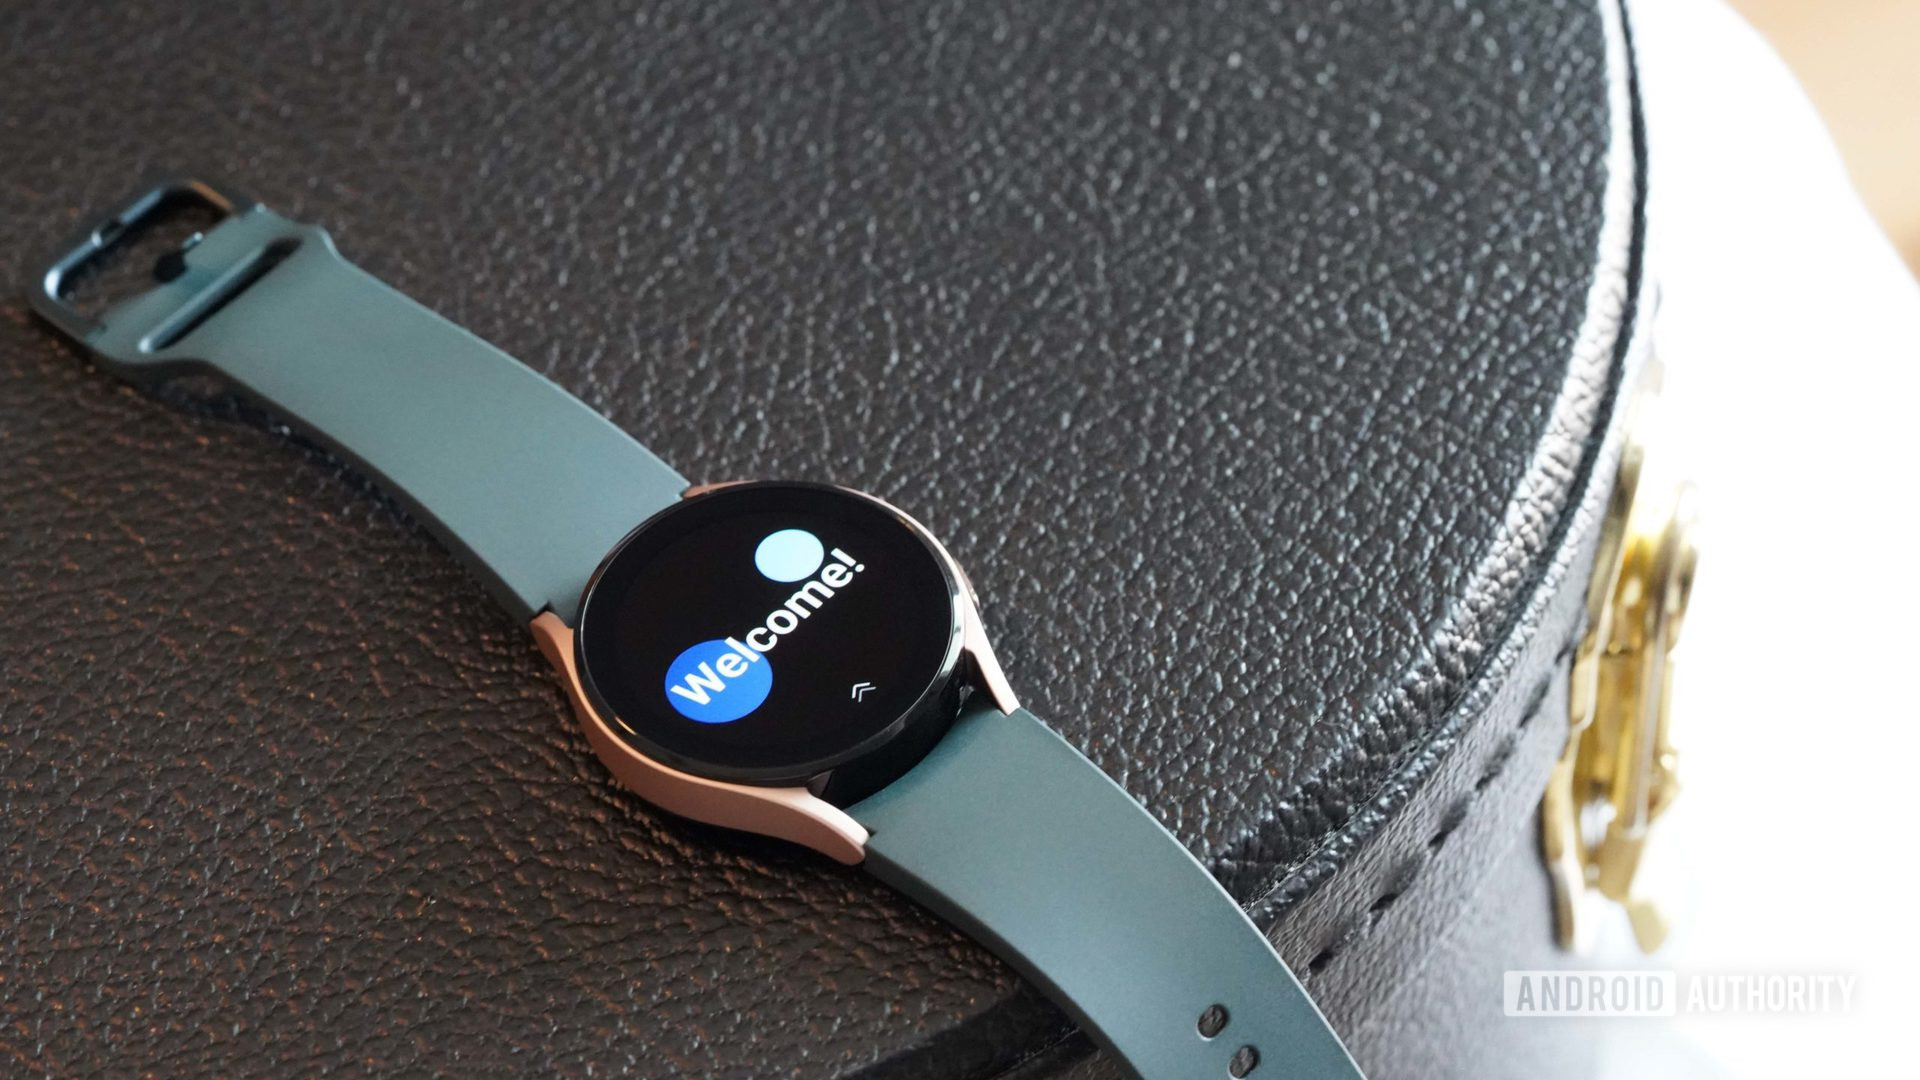 Samsung Galaxy Watch 4 rests on a black leather case displaying the watches Welcome screen.